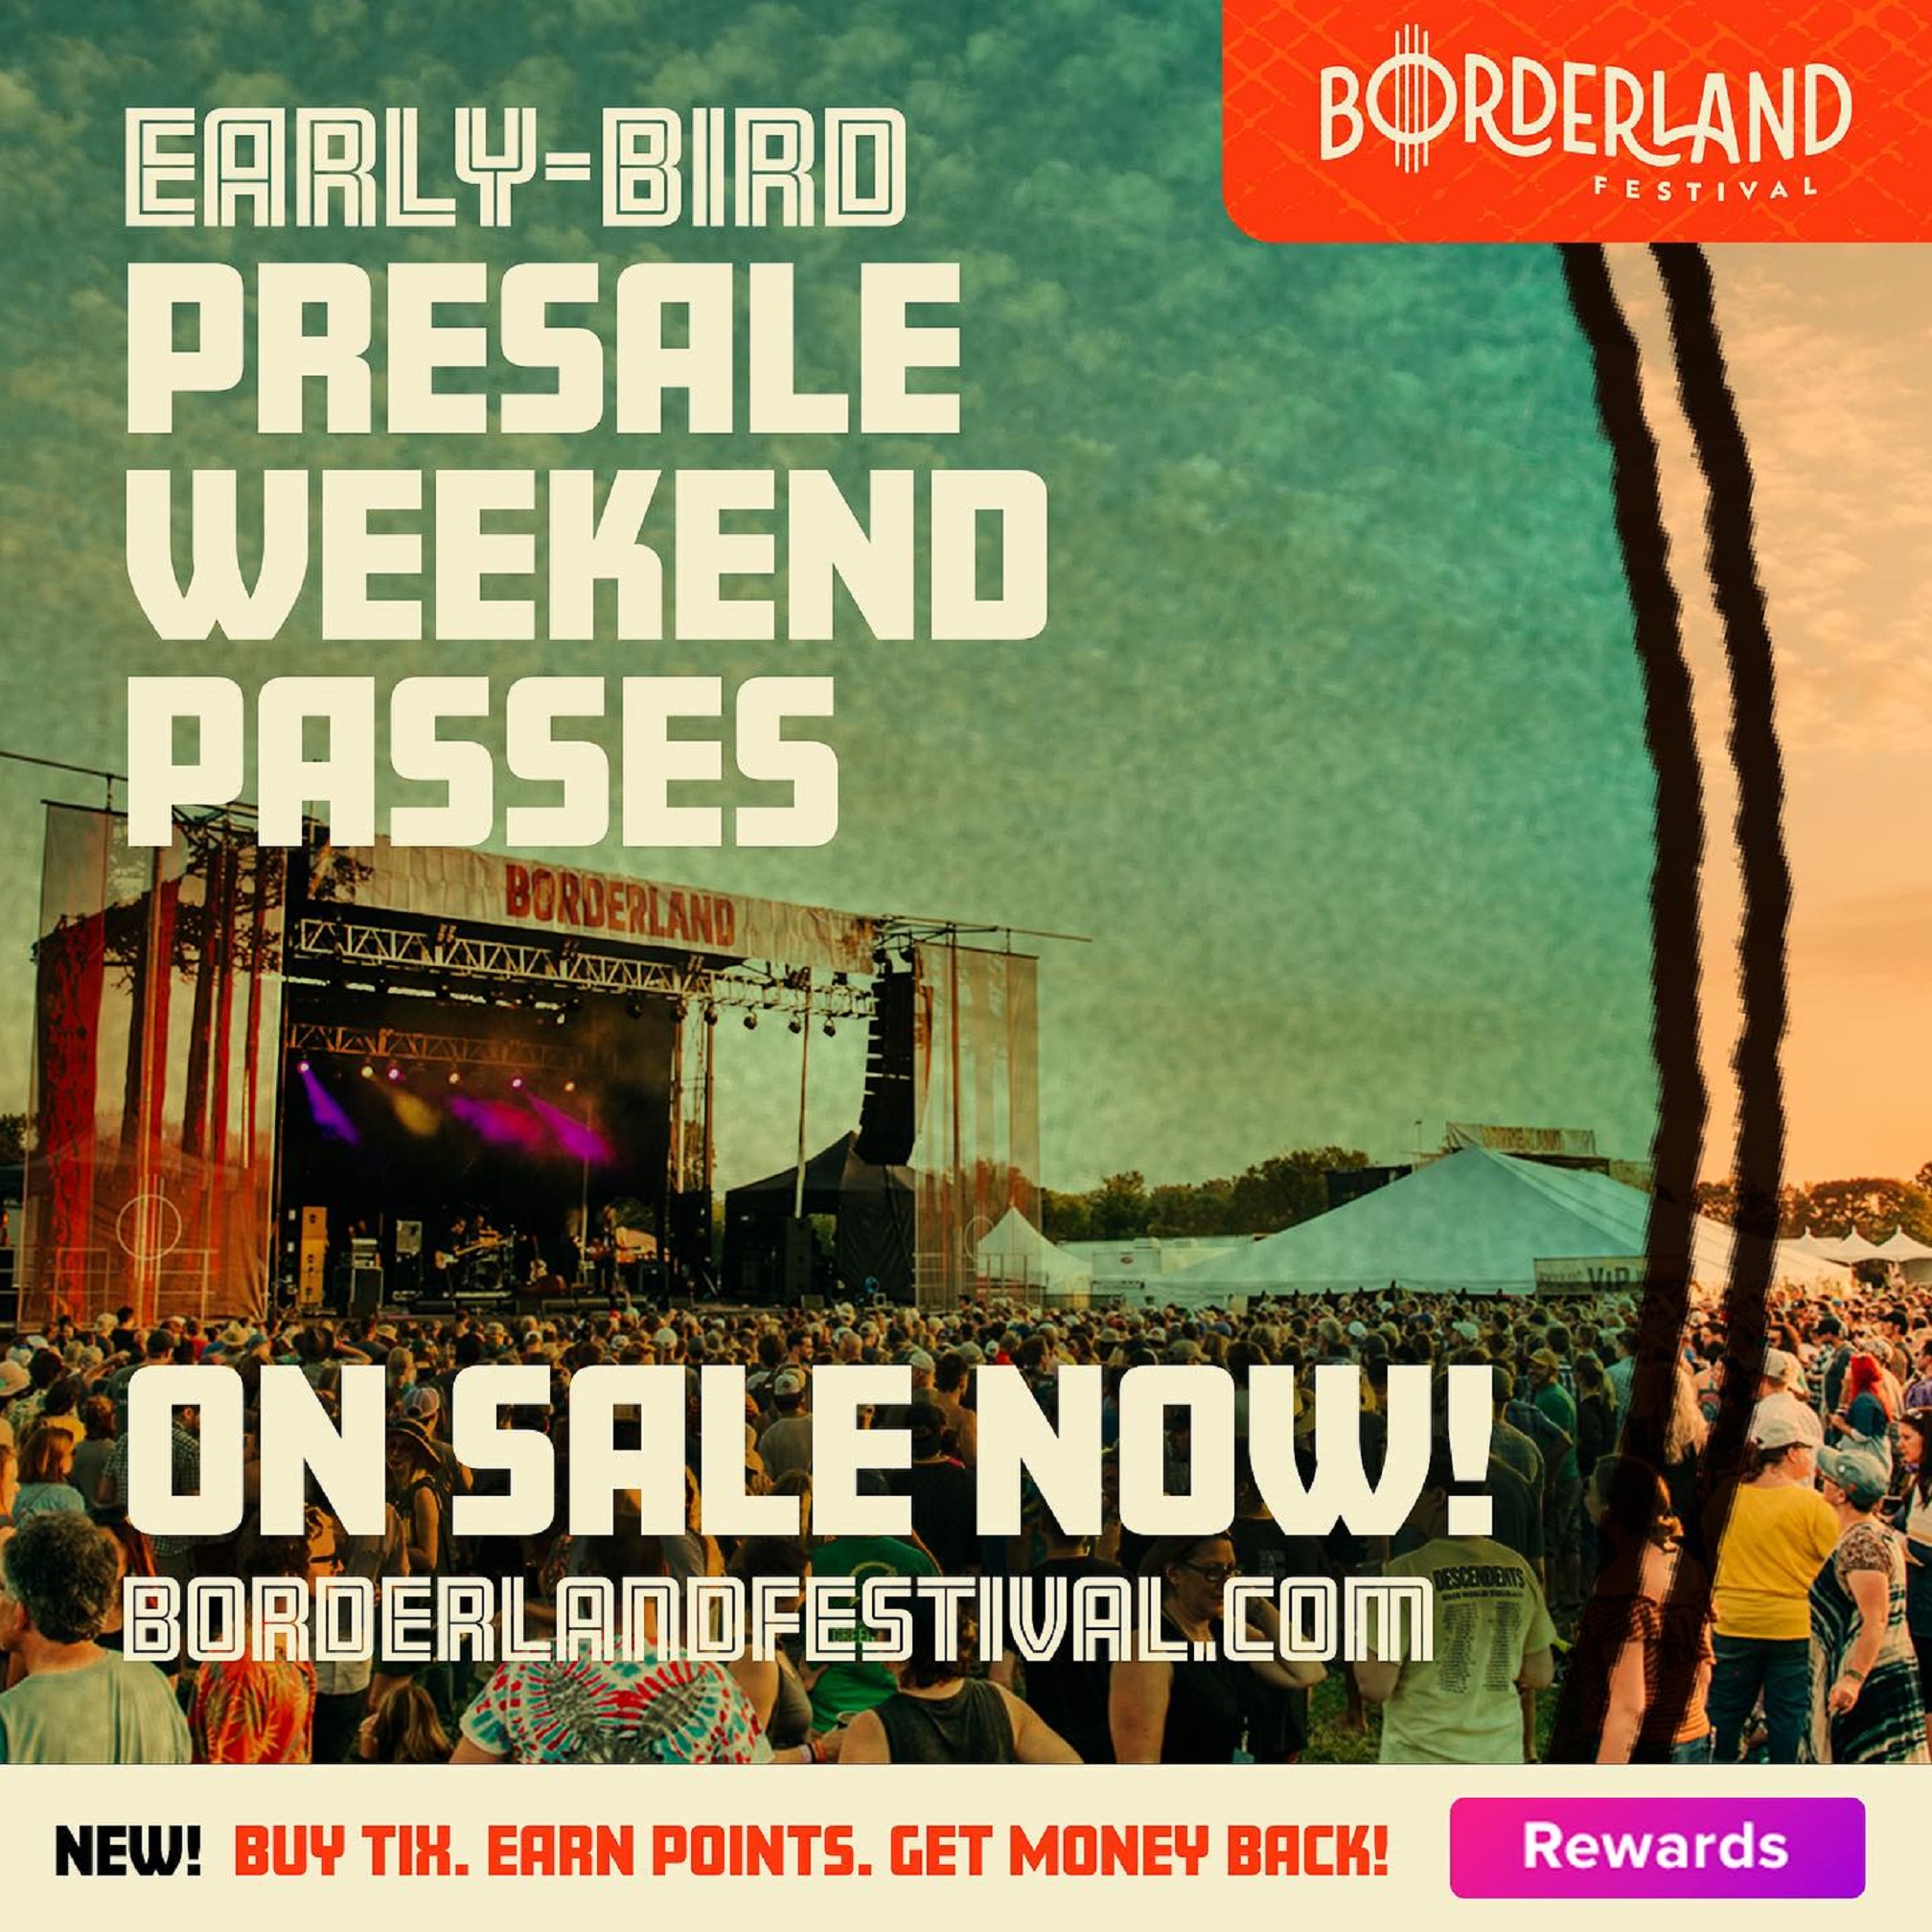 EARLY-BIRD TICKETS ON SALE FOR THE BORDERLAND MUSIC + ART FESTIVAL